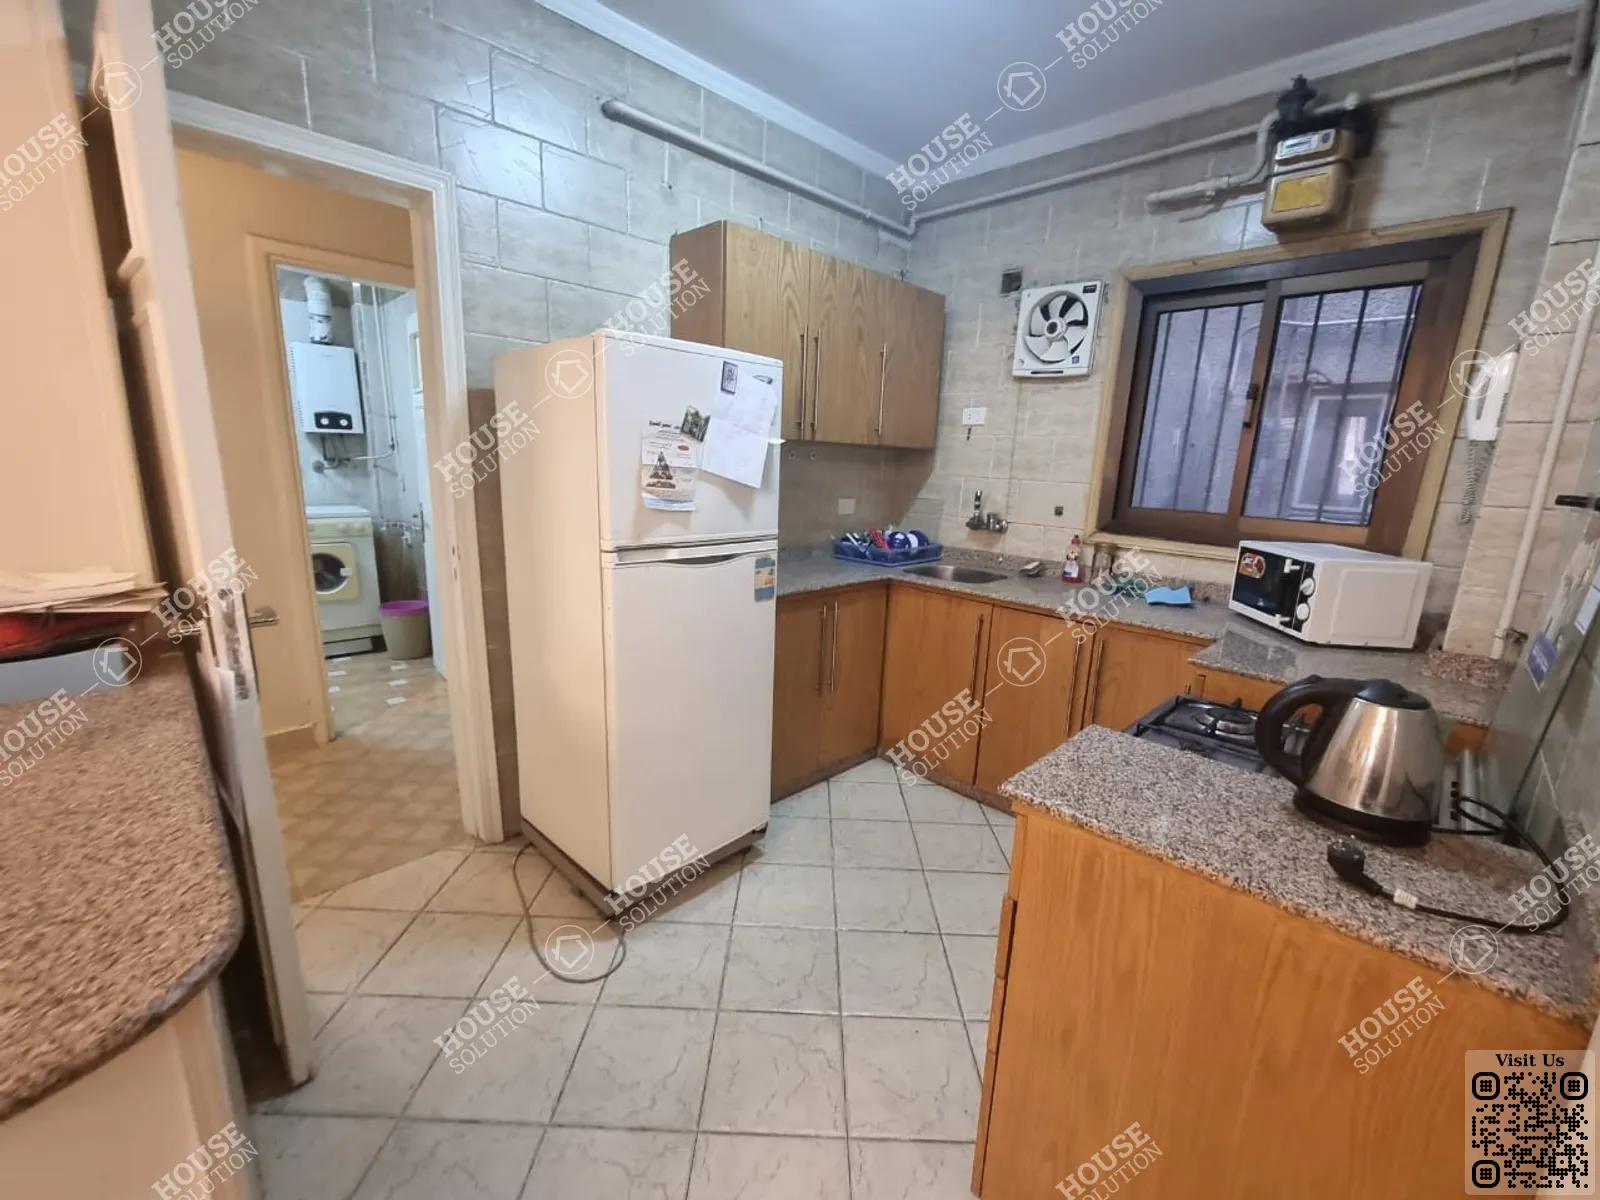 KITCHEN  @ Apartments For Rent In Maadi Maadi Degla Area: 110 m² consists of 2 Bedrooms 1 Bathrooms Furnished 5 stars #3840-1